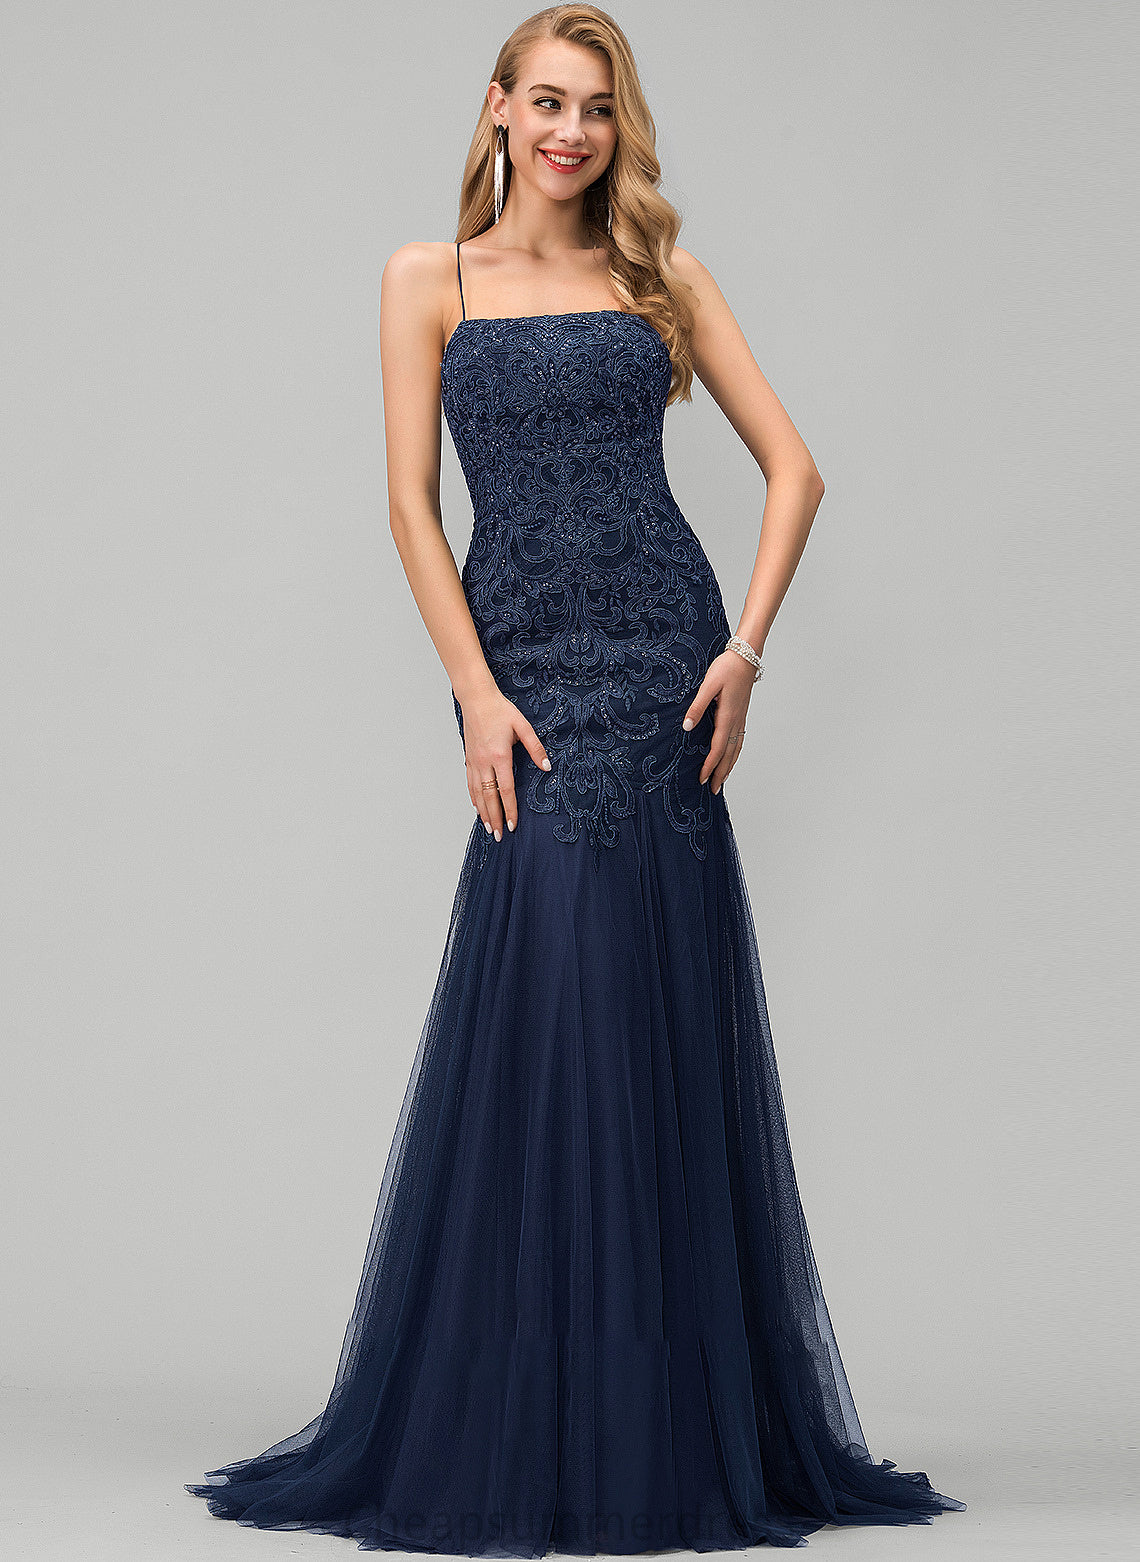 Neckline Prom Dresses Sequins Square Lace With Train Tulle Trumpet/Mermaid Delilah Sweep